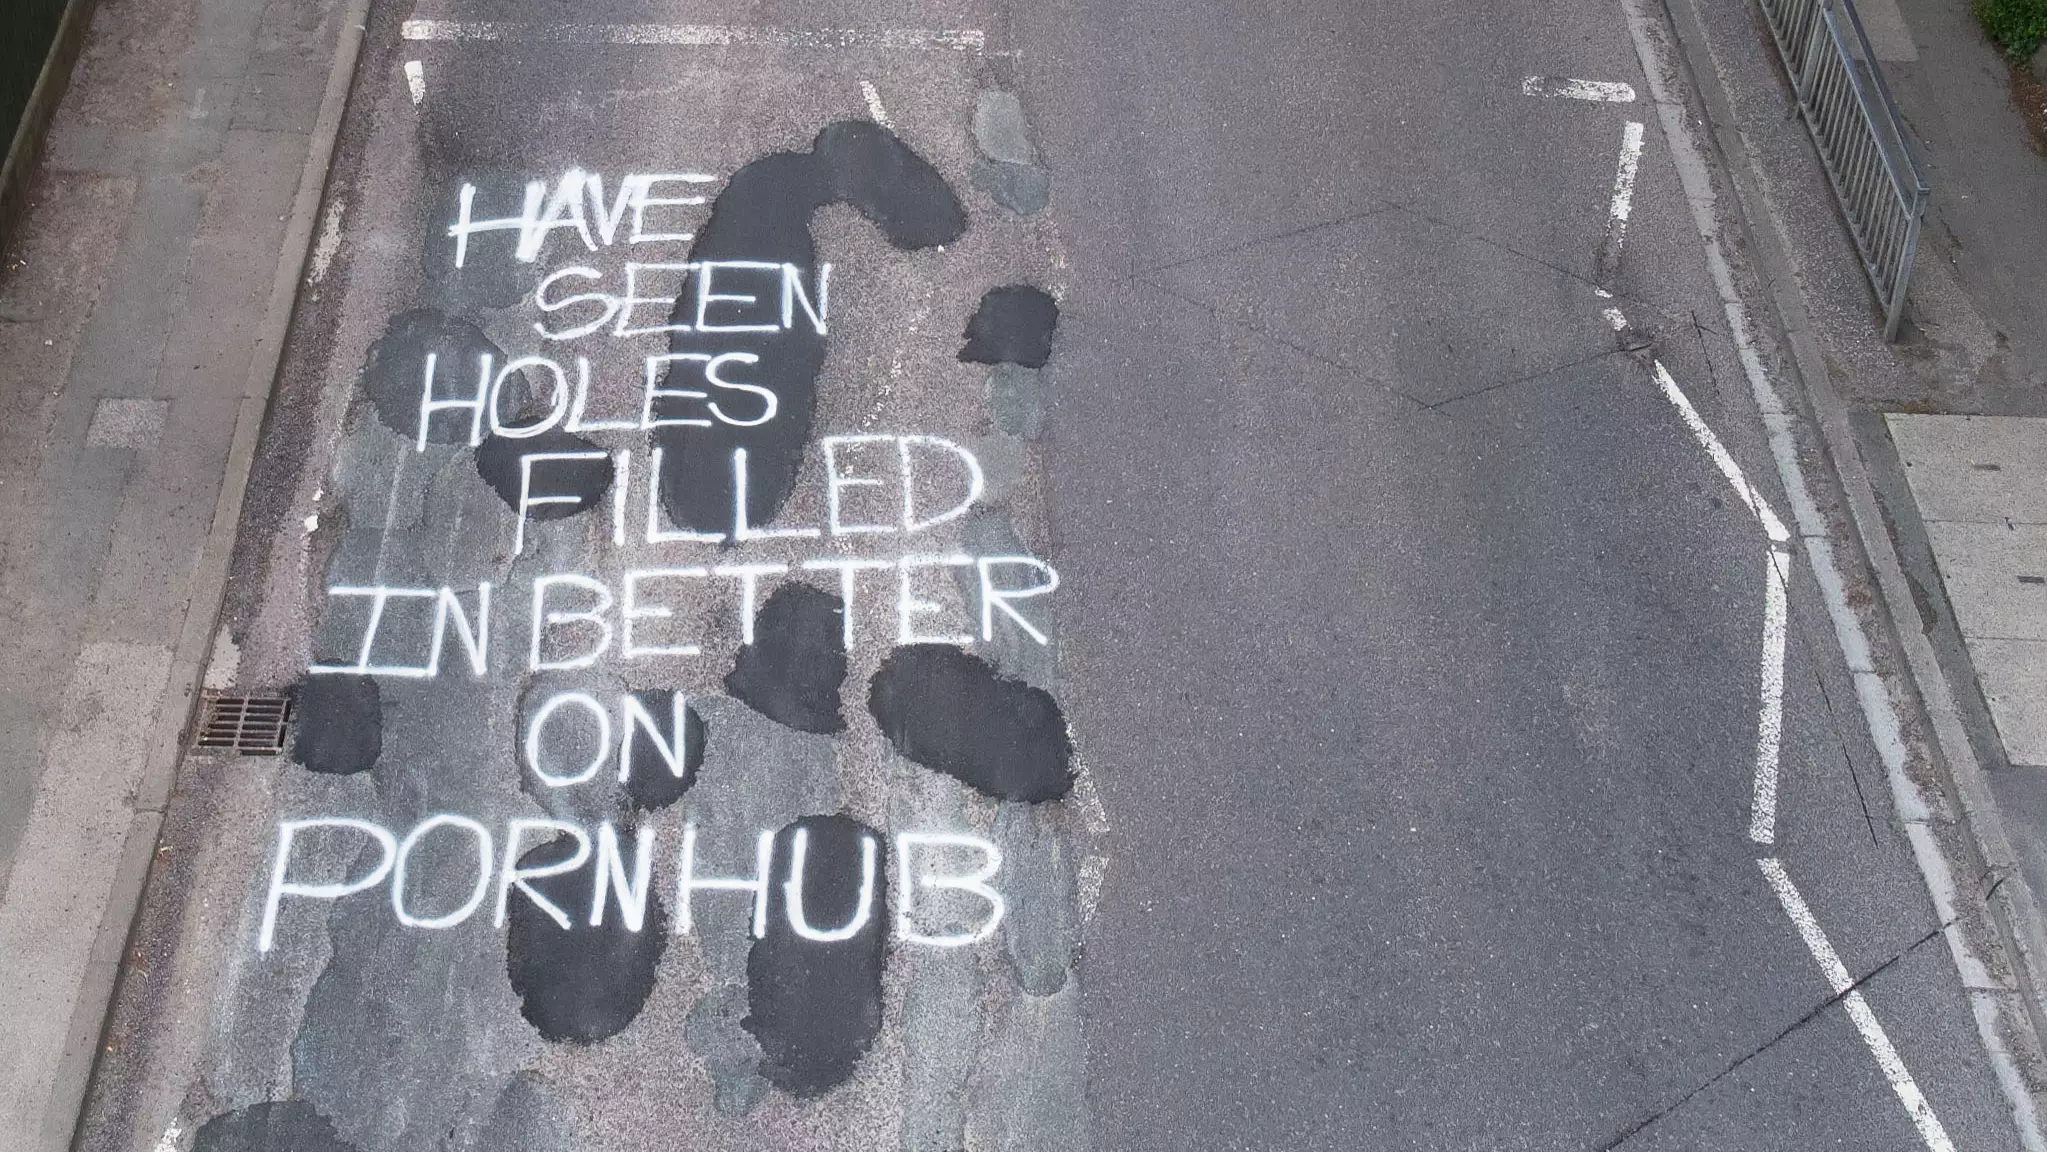 Mystery Graffiti Artist Leaves Message Comparing Road Potholes To Porn Site